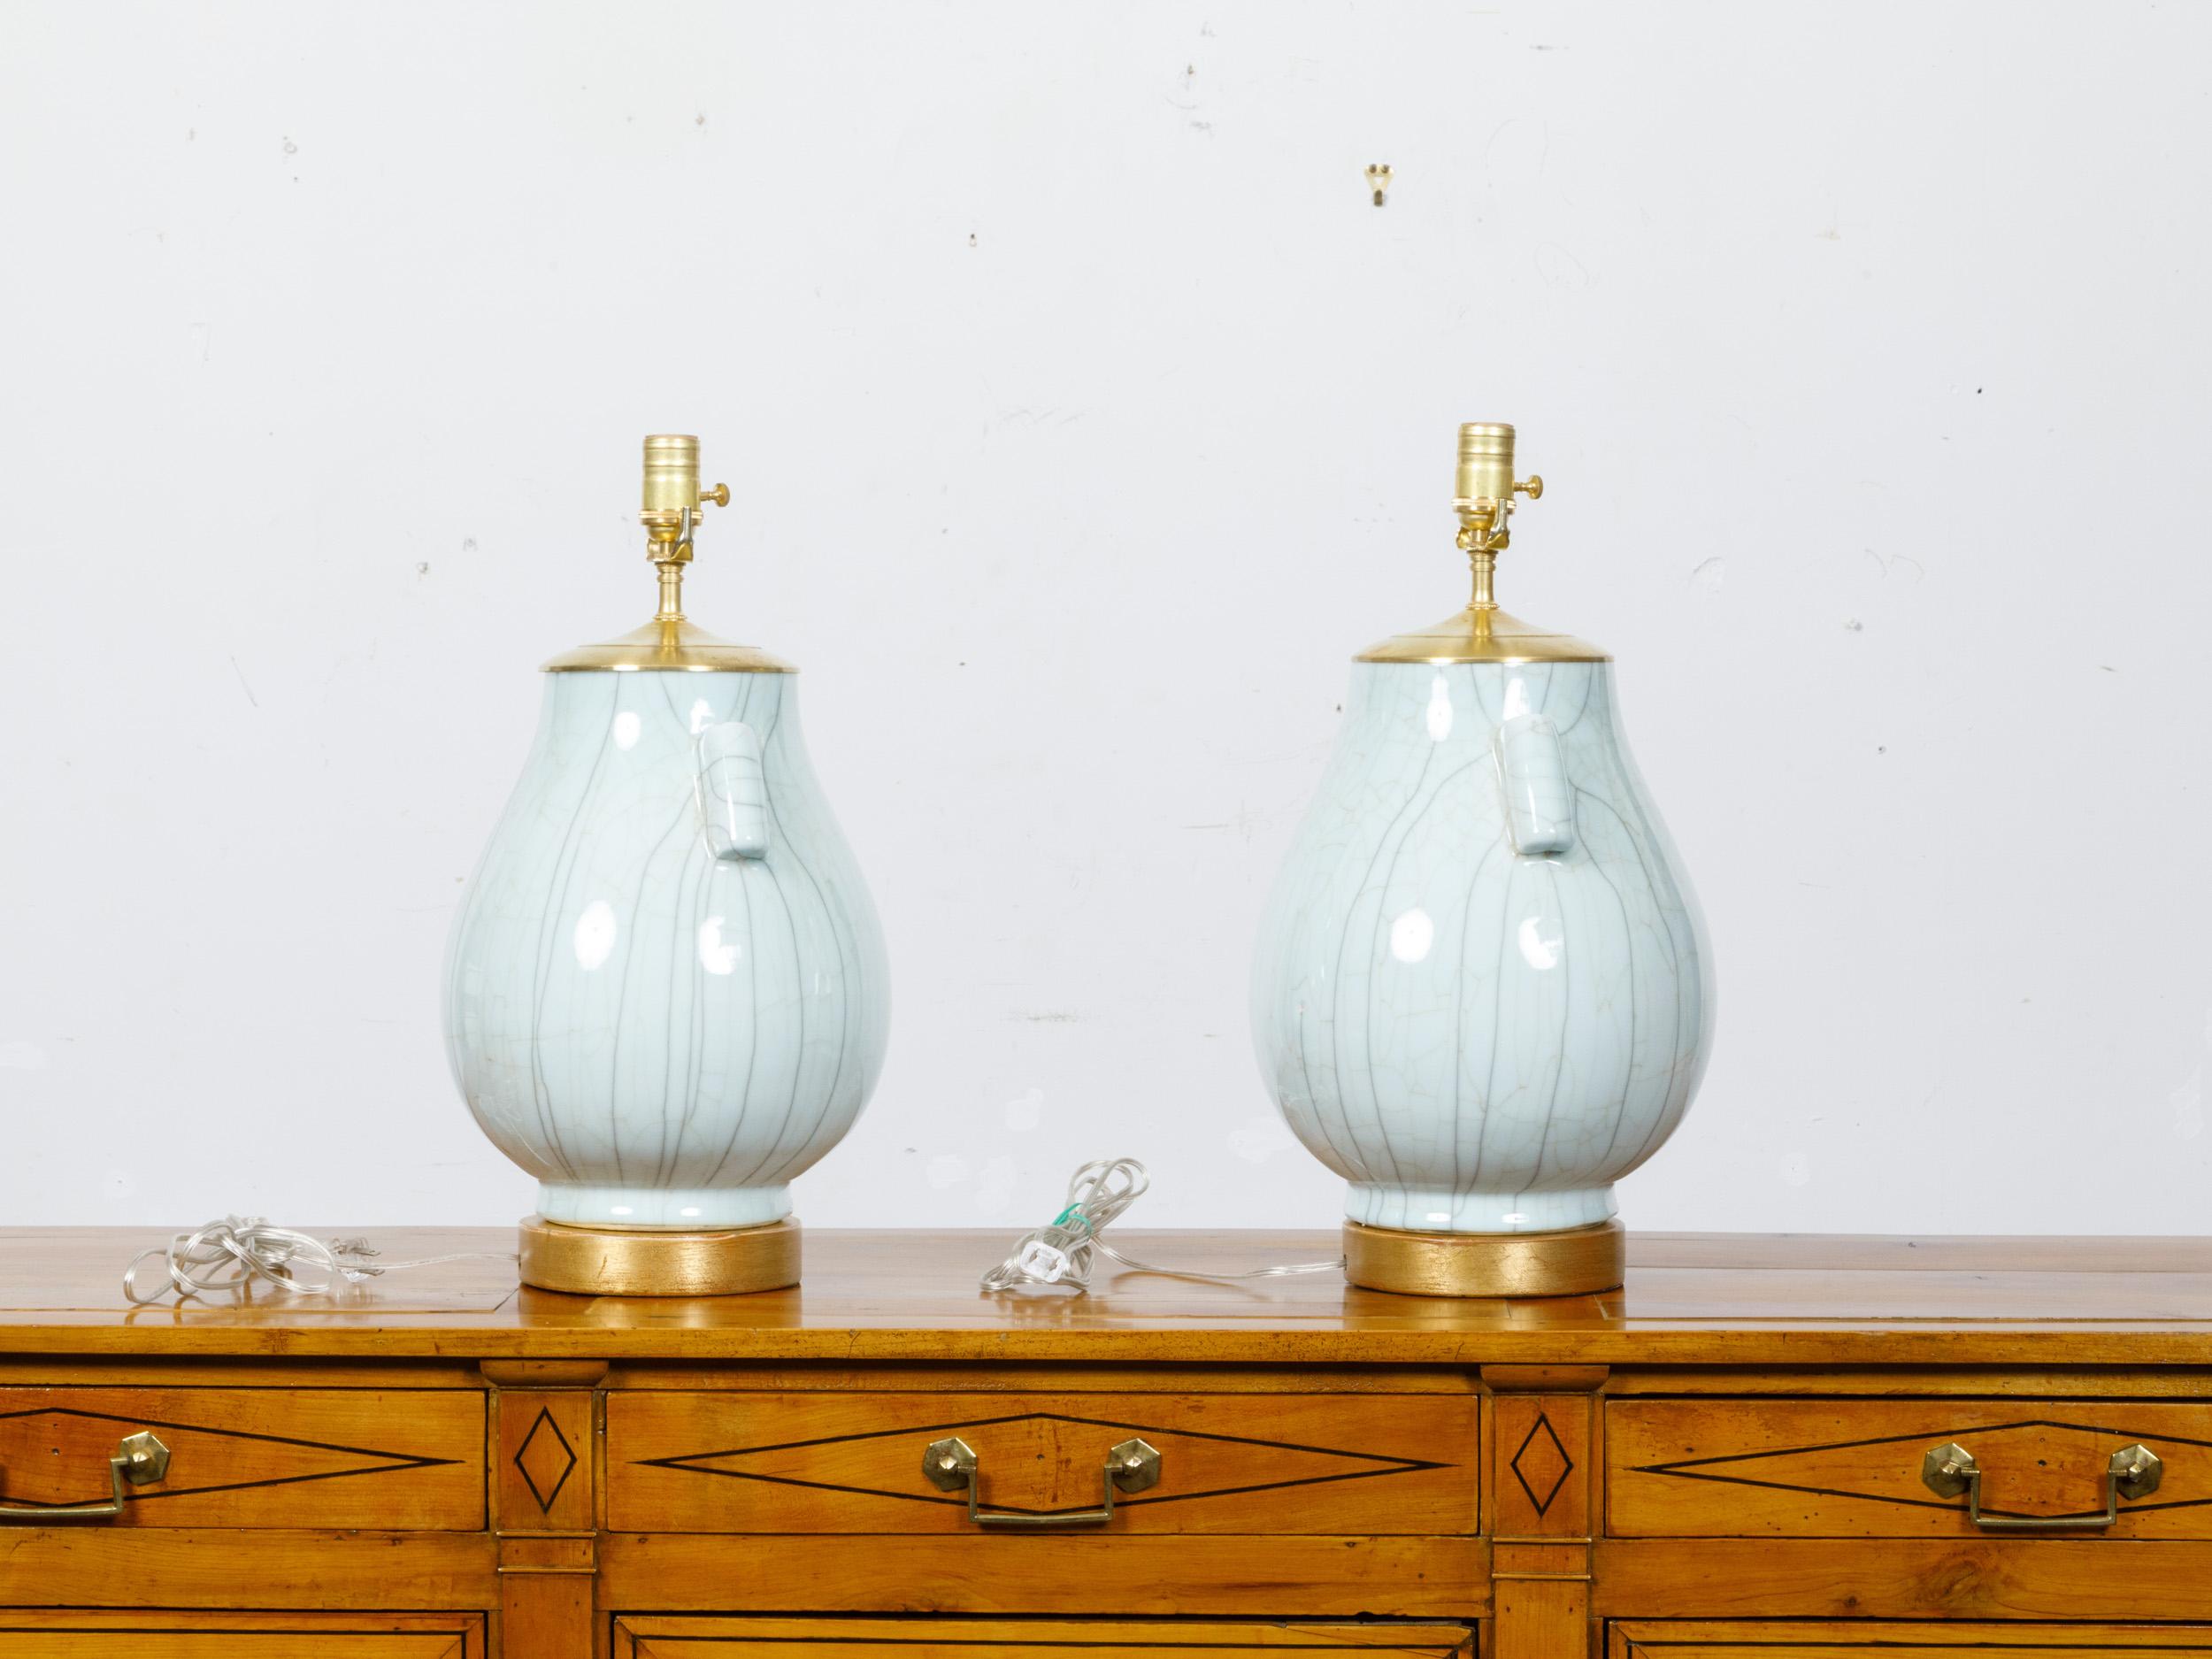 A pair of white porcelain vases with crackle finish and lateral motifs, made into single socket tables lamps wired for the USA and mounted on circular gilt wooden bases. This exquisite pair of table lamps features white porcelain vases with a